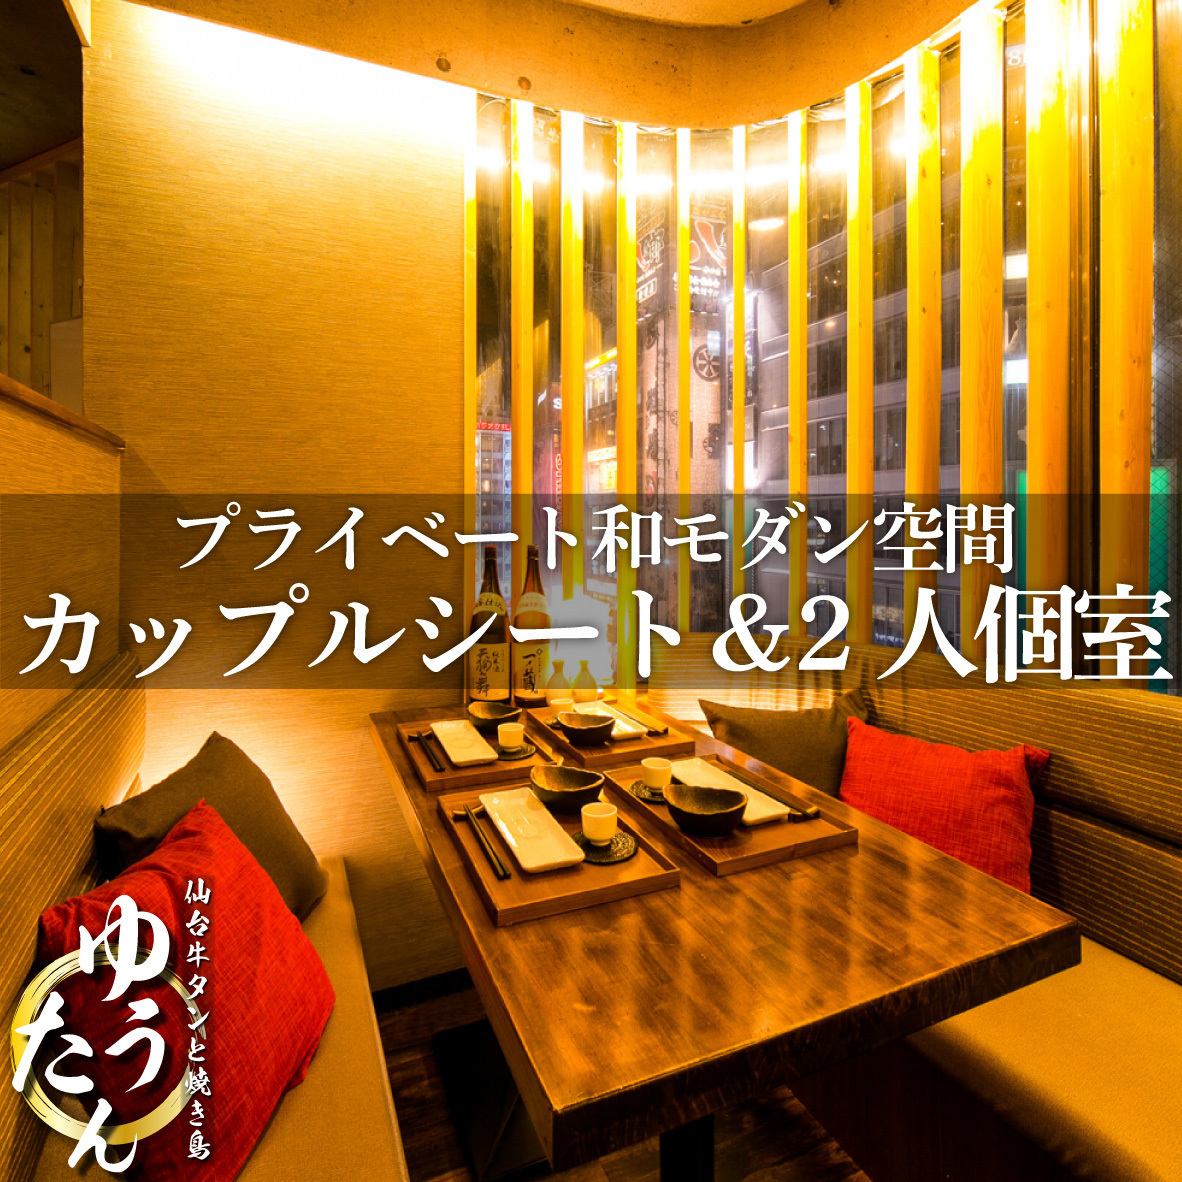 Right next to Shinjuku Station! We offer private rooms with a relaxing atmosphere.